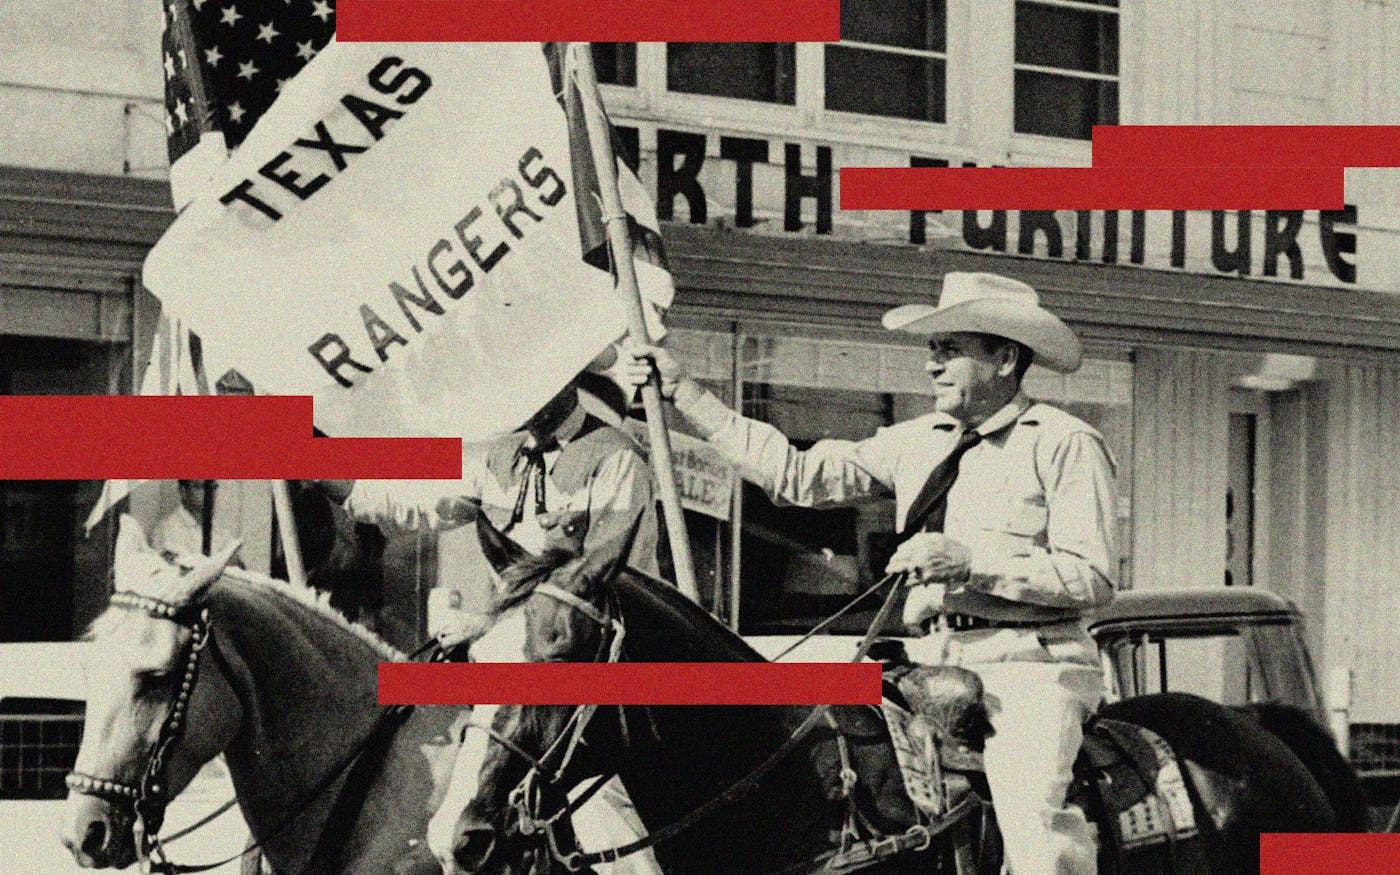 Ask History: Who are the Texas Rangers?